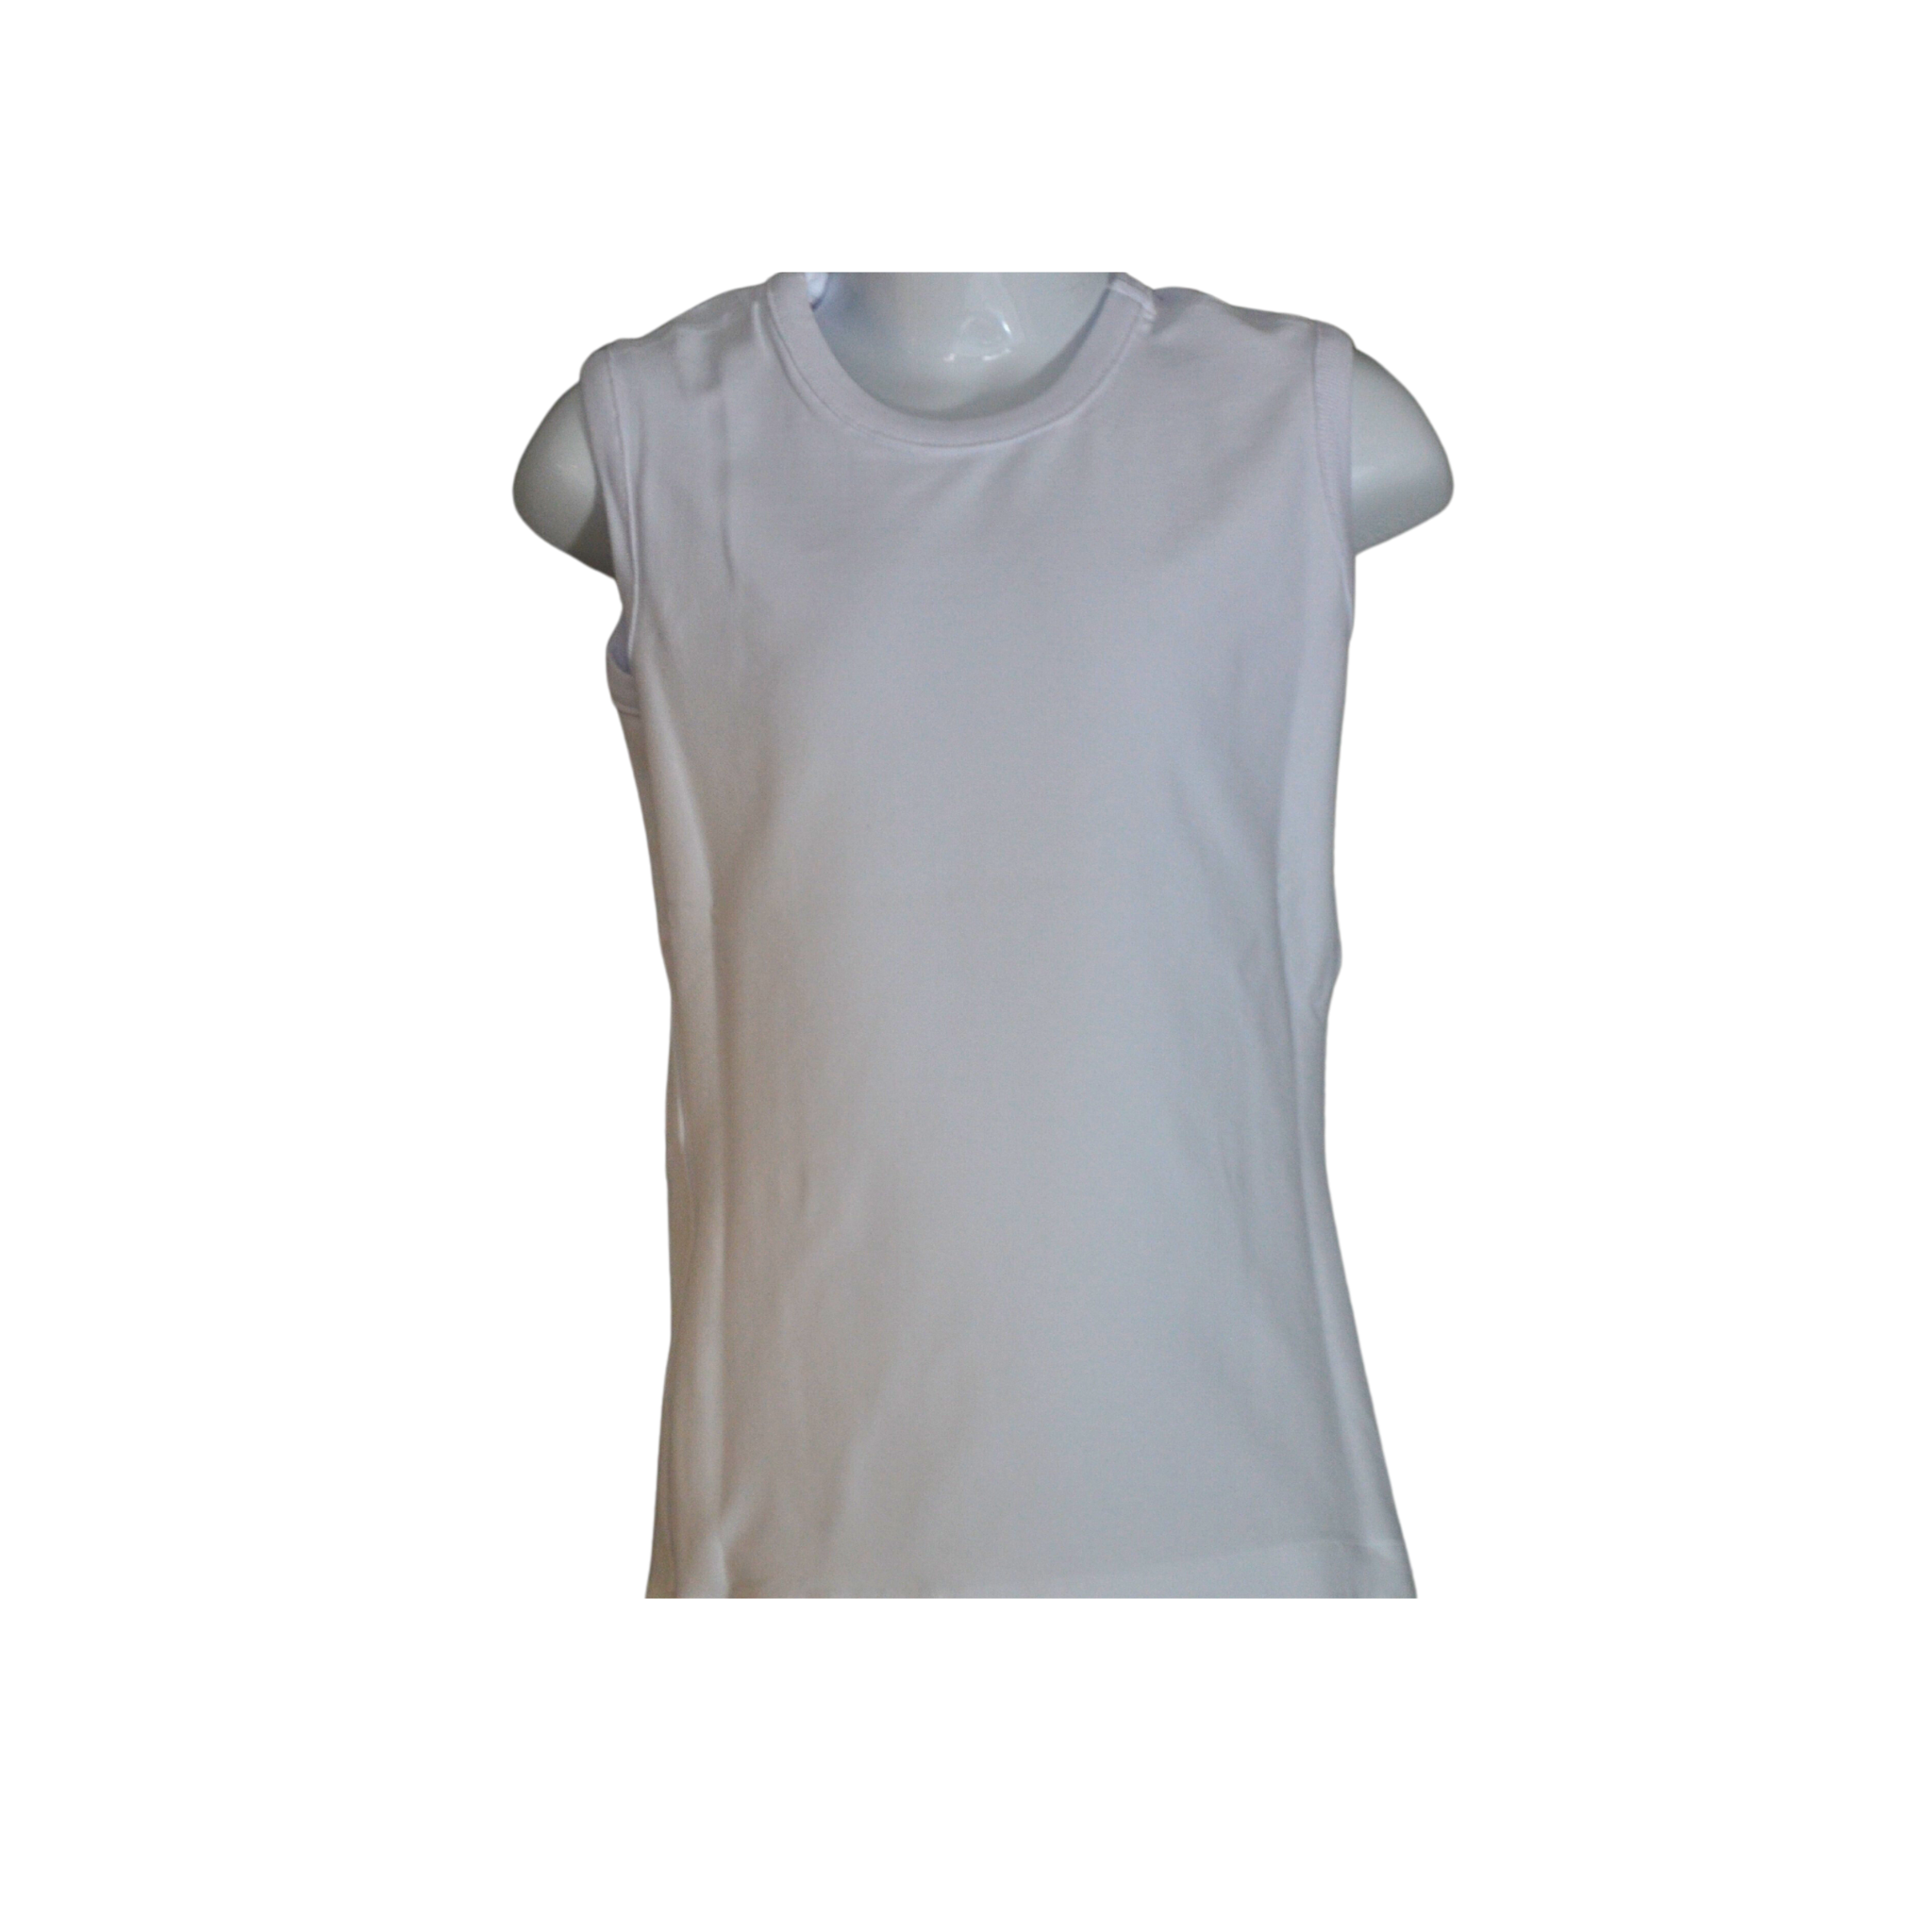 Calming Clothing - Therapeutic Sleeveless Top - Medium to Firm Compression